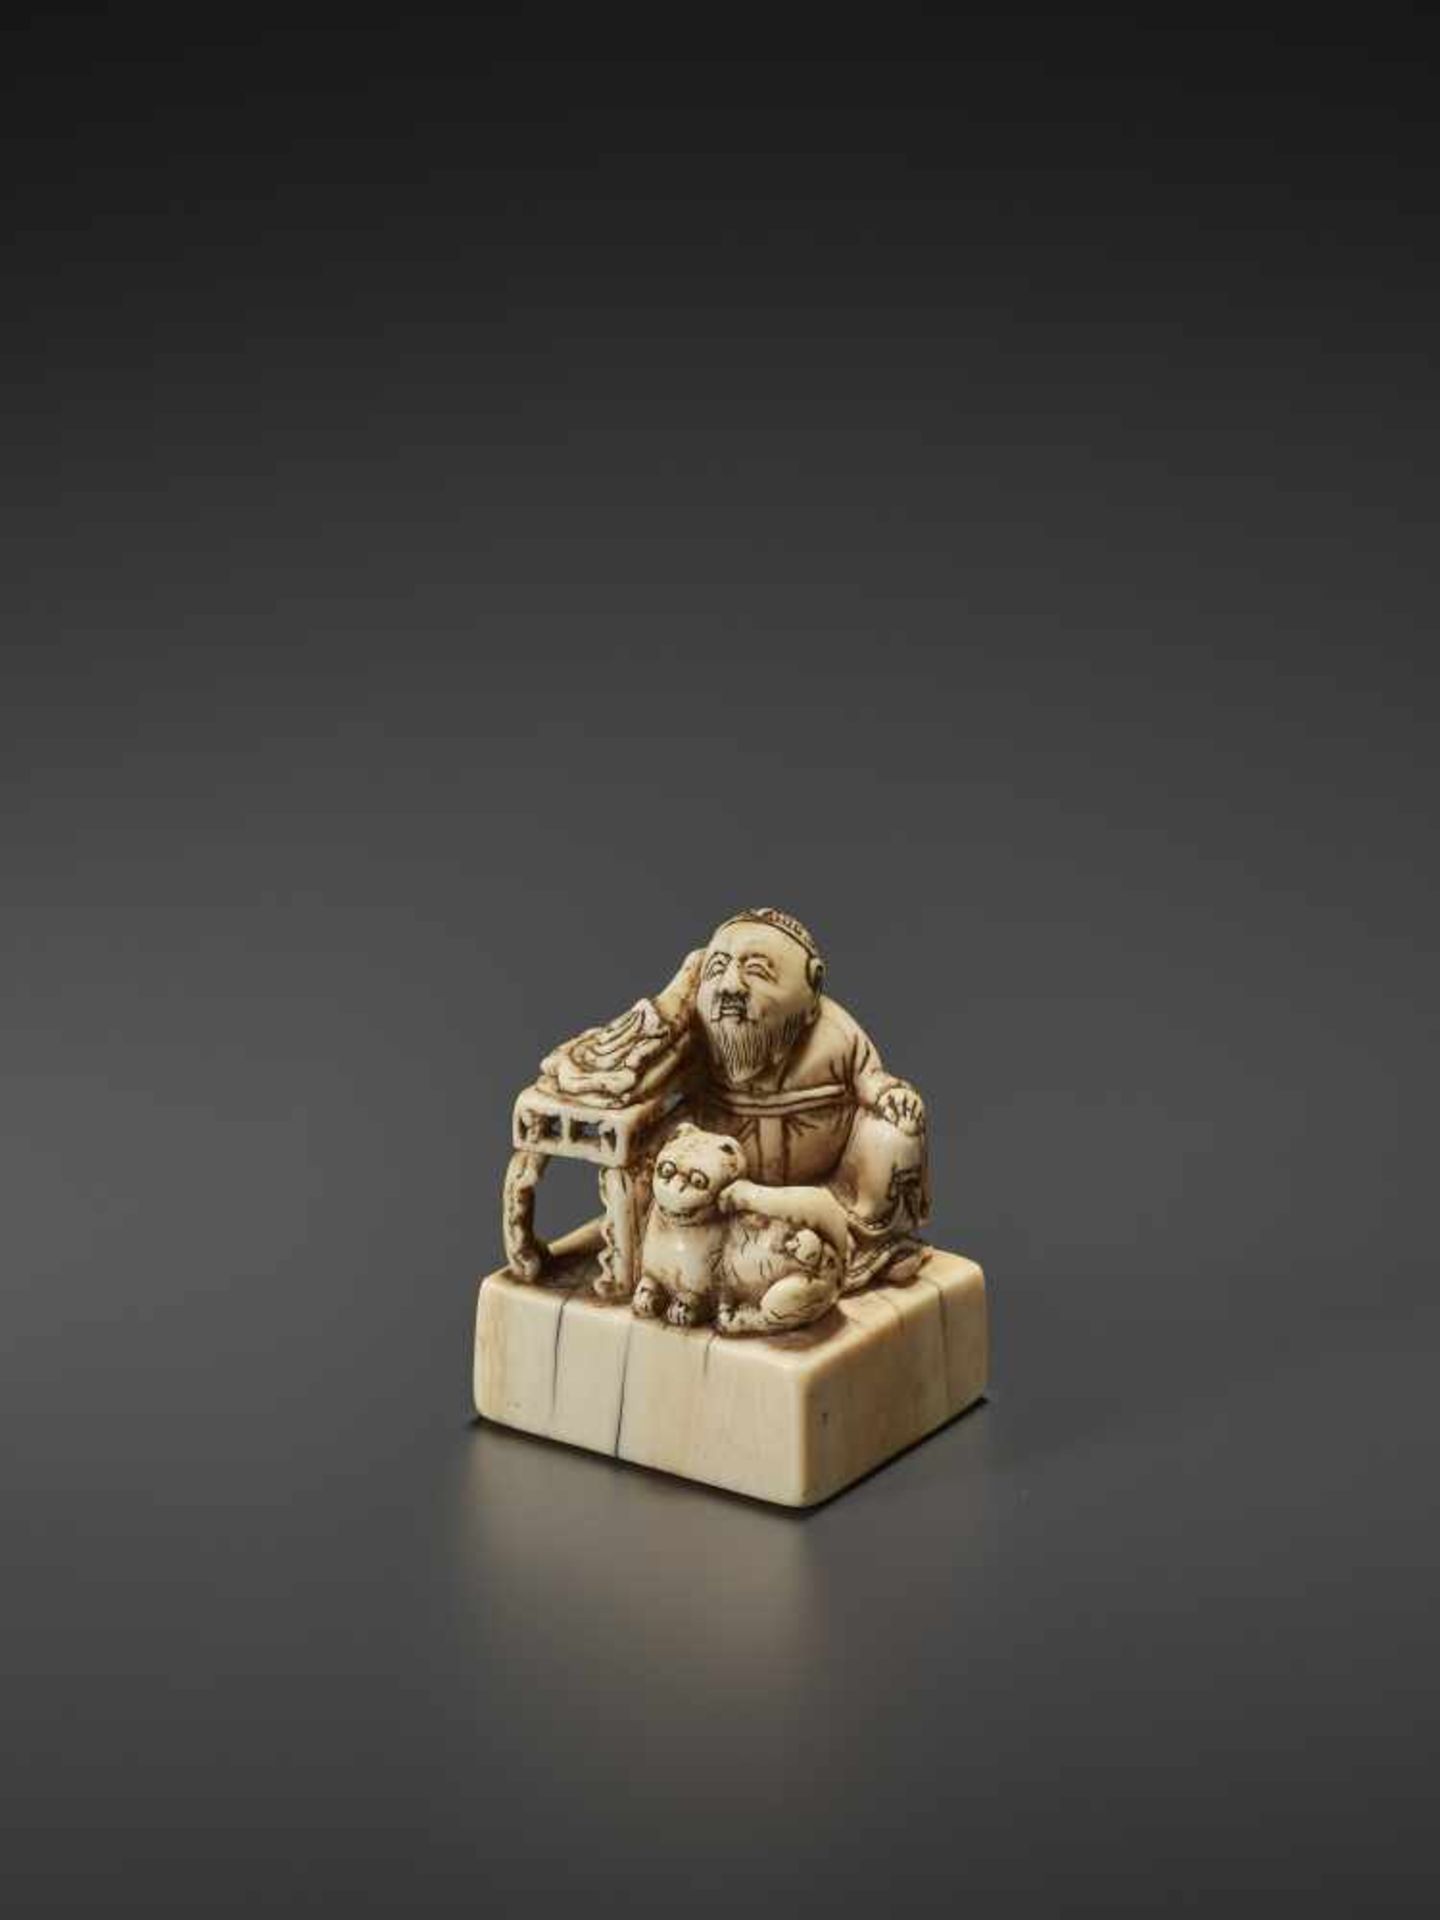 AN UNUSUAL AND EARLY IVORY NETSUKE OF A CHINESE SAGE WITH TIGER Unsigned, ivory netsukeJapan, 18th - Image 2 of 9